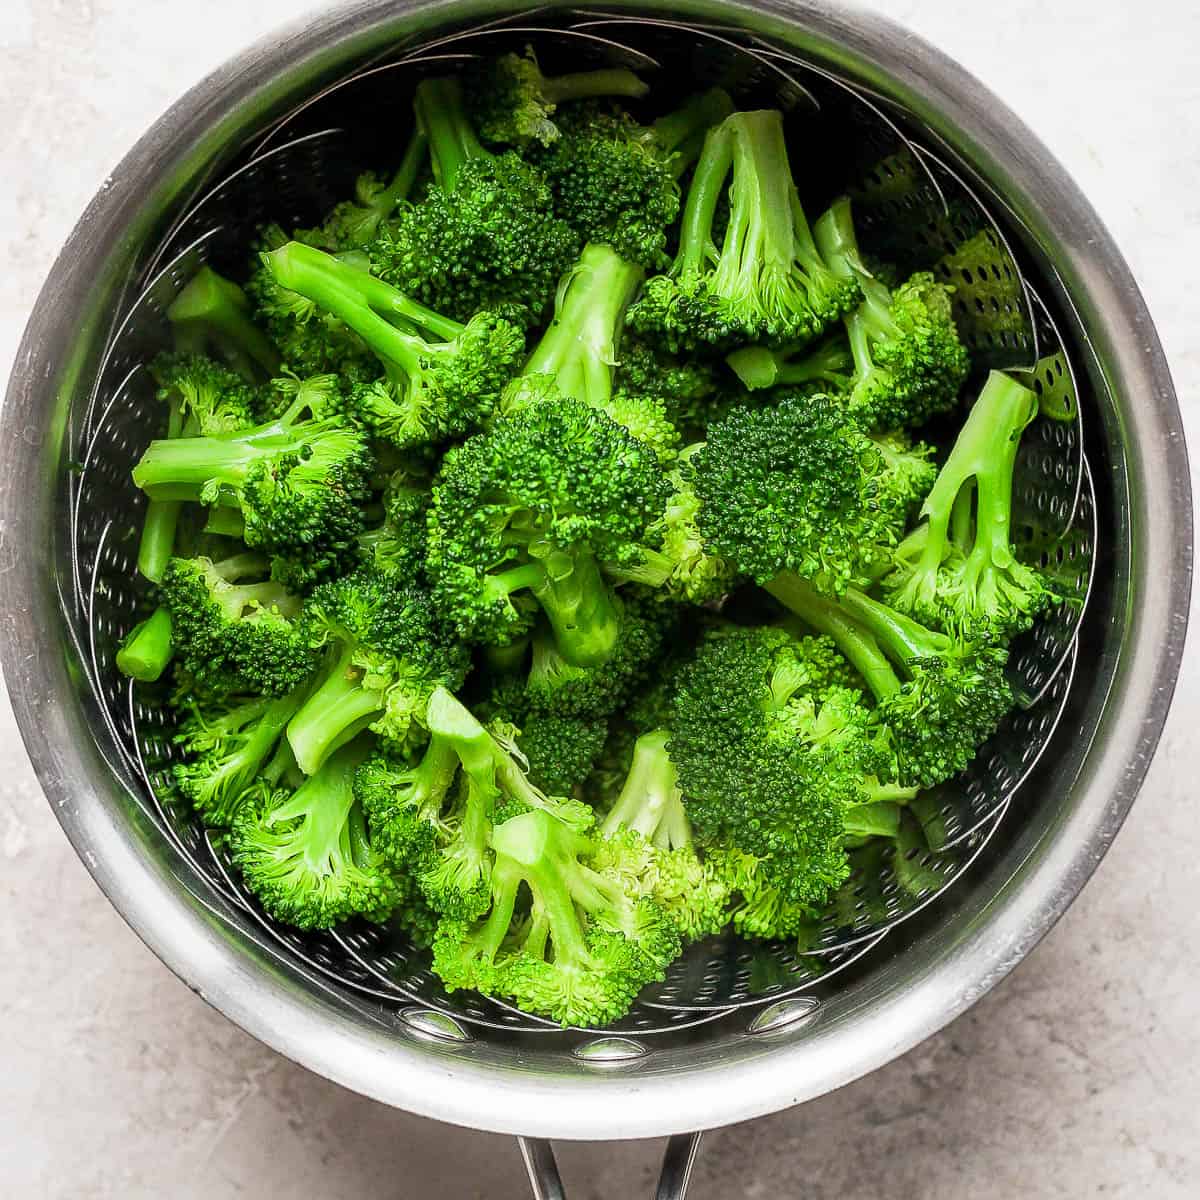 https://thewoodenskillet.com/wp-content/uploads/2022/11/how-to-steam-broccoli-recipe-1.jpg